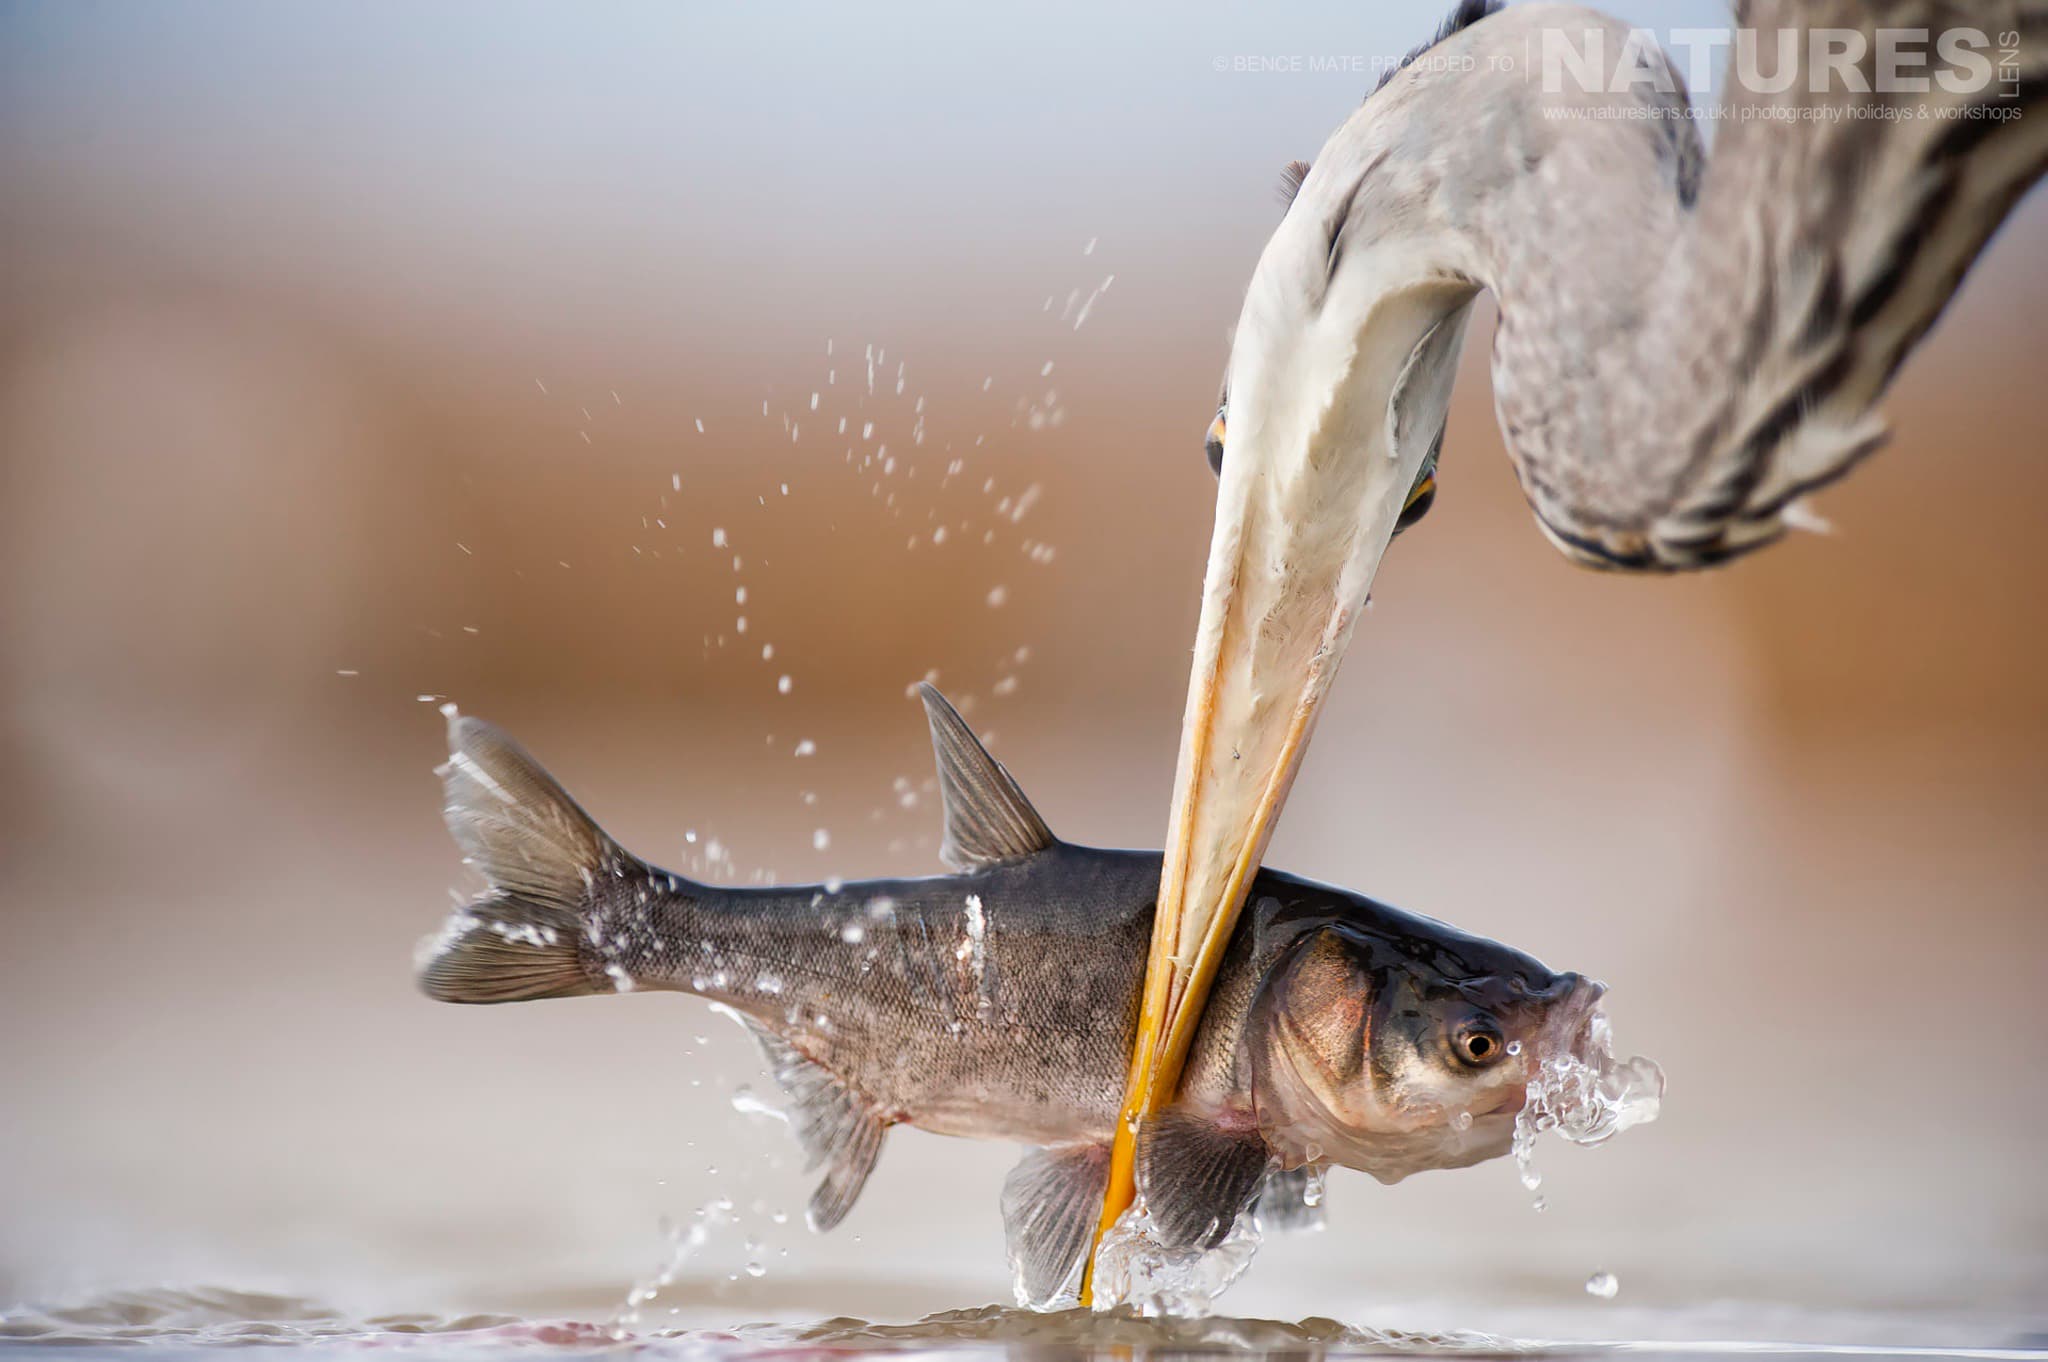 Heron with fish at Bence Máté's Photography Hides during the Hungarian Winter